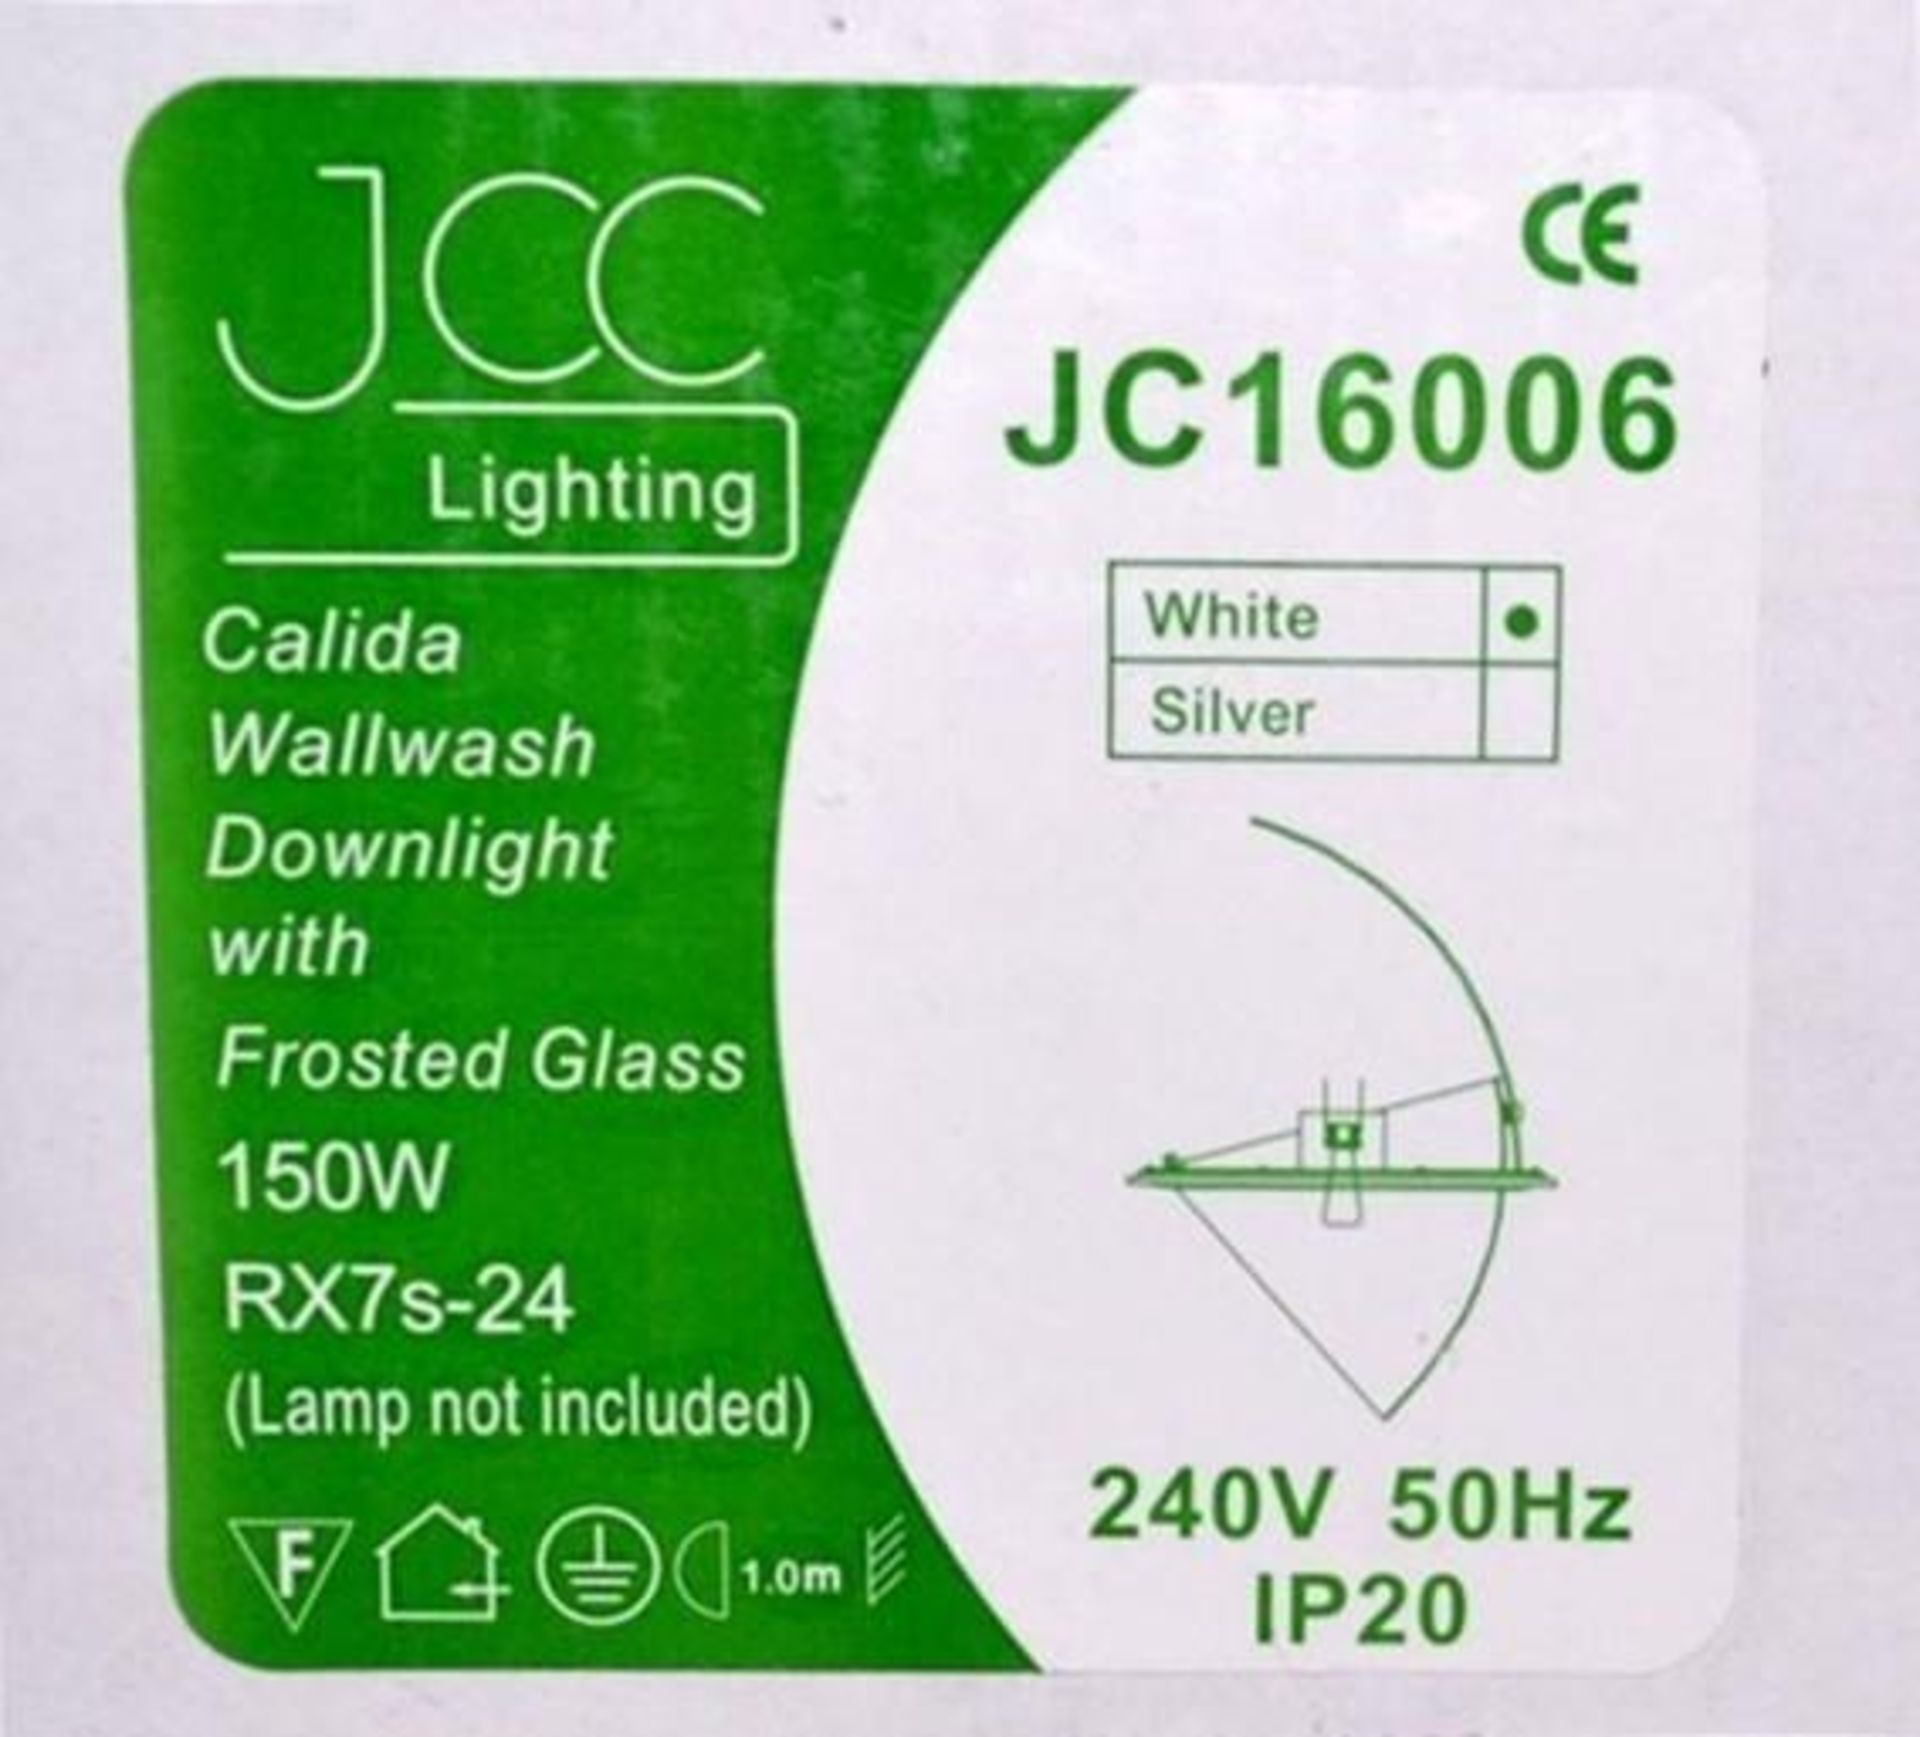 10 x JCC Lighting JC16006 Calida Large Wallwash Downlights With Frosted Lens - Colour: White - New/U - Image 2 of 7